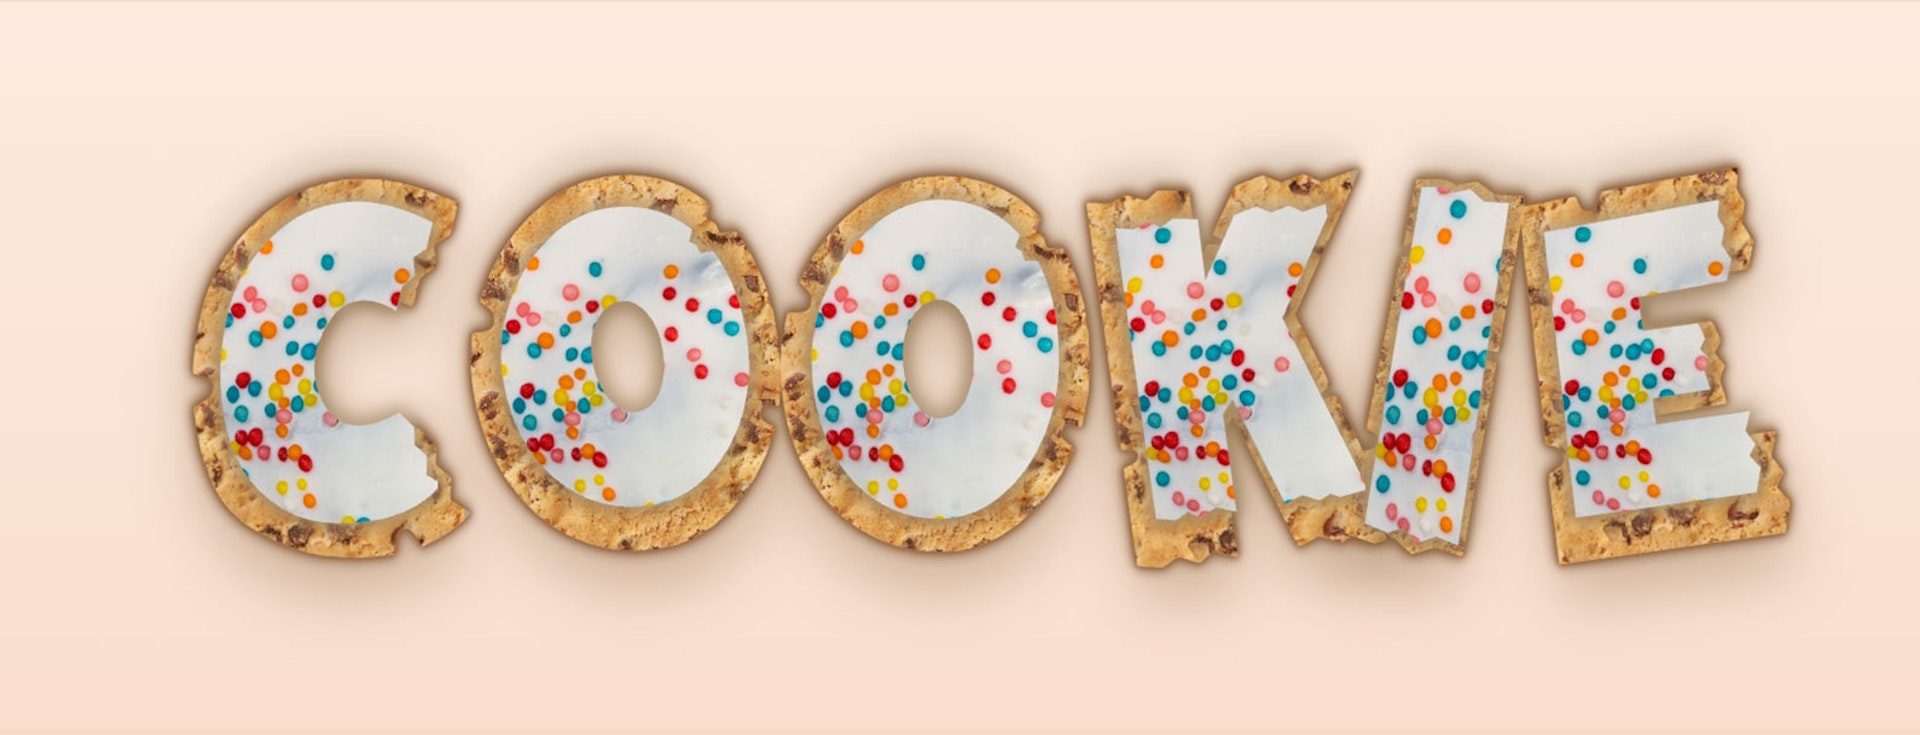 Cookie text effect with cookie base and sprinkles on top but more perfectly aligned